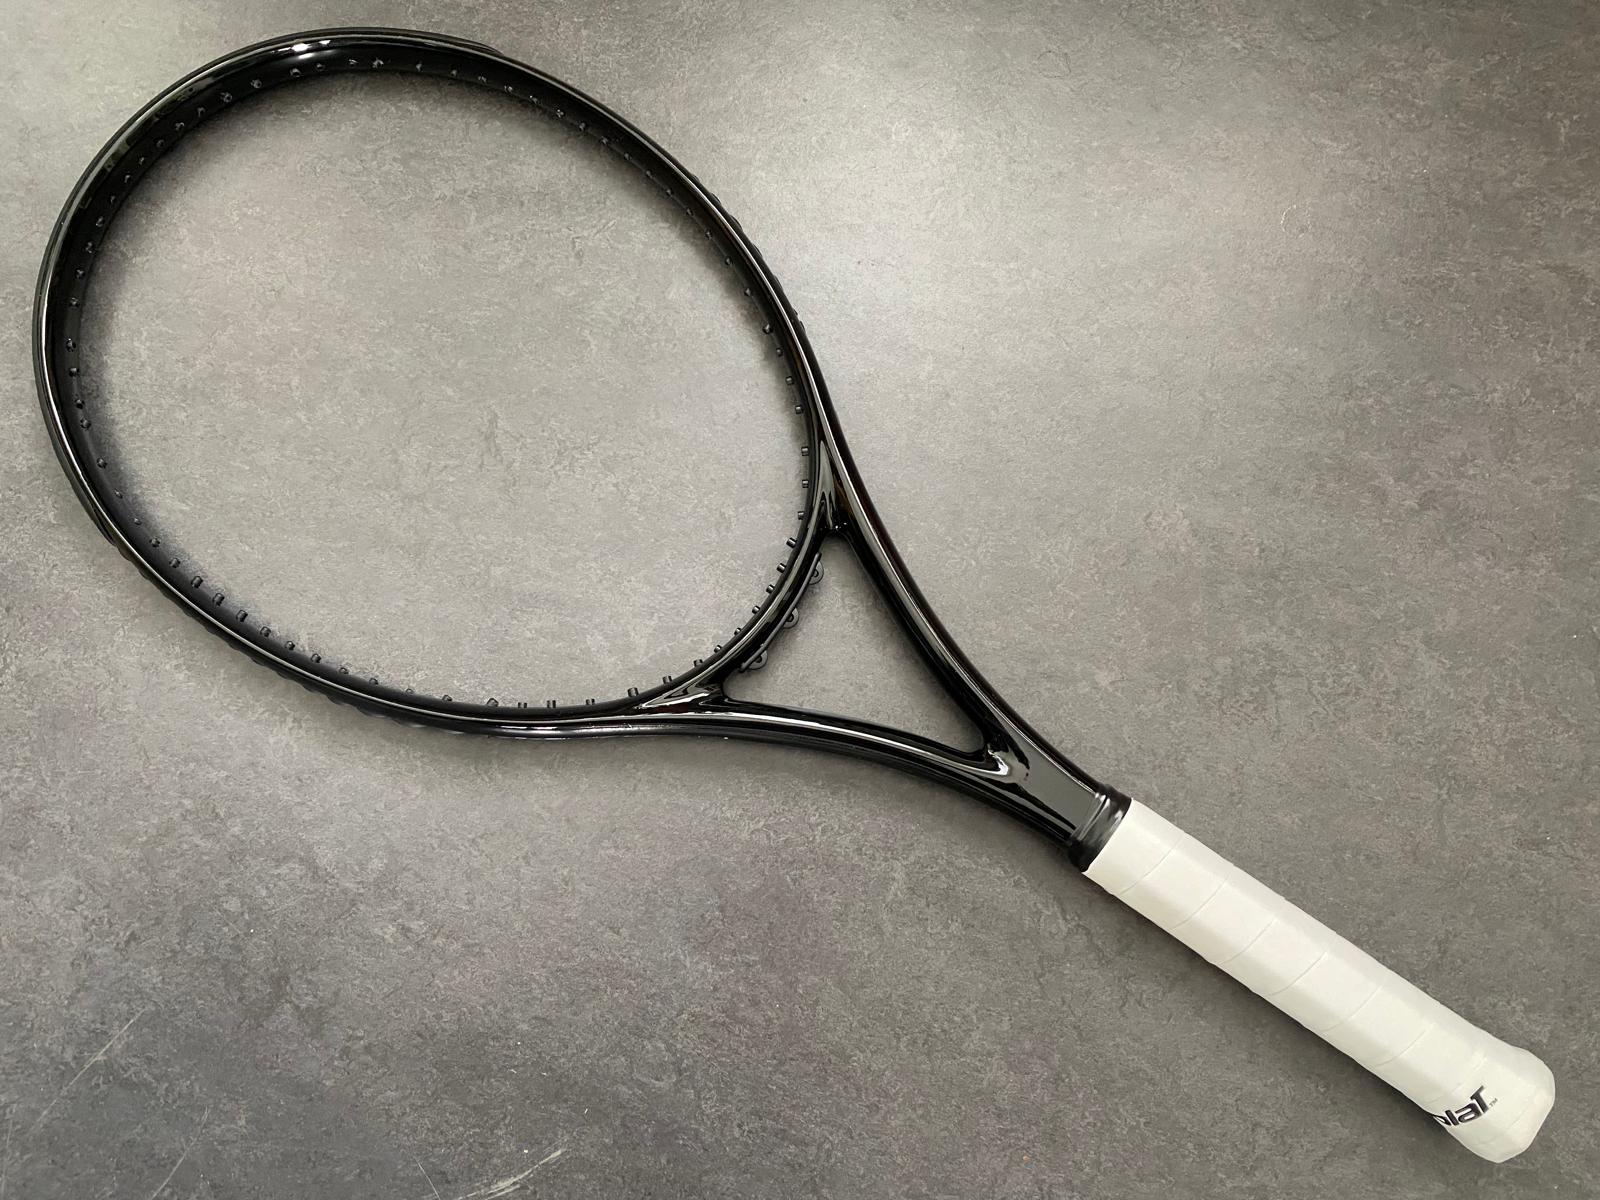 Babolat Pro Stock Pure Drive Blacked Out